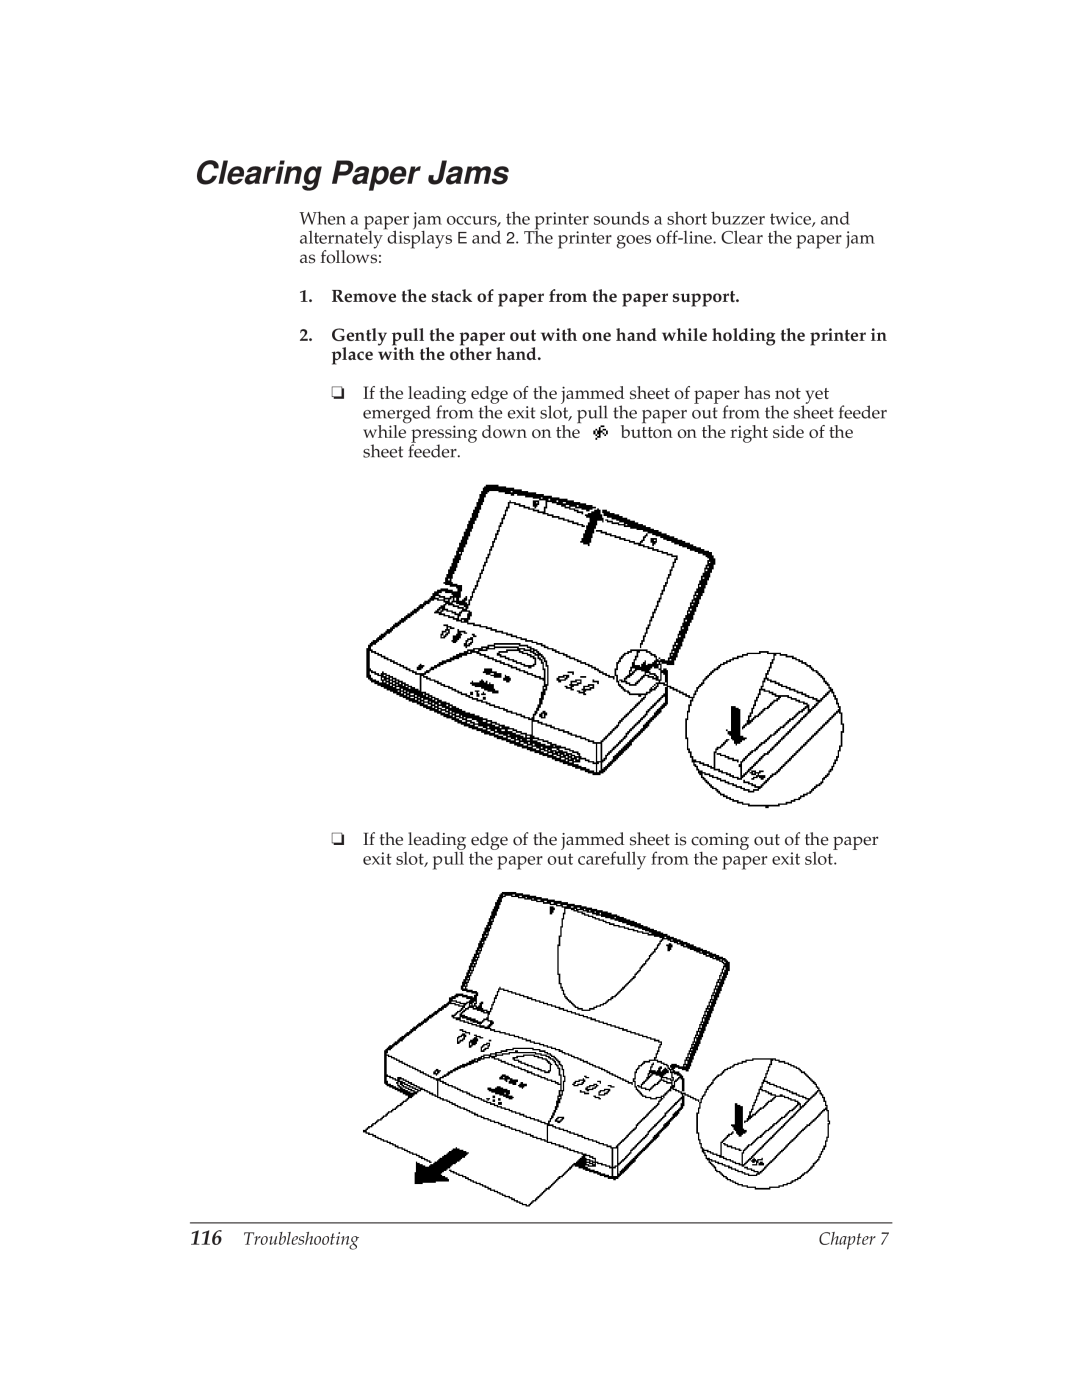 Canon BJ-30 manual Clearing Paper Jams, Remove the stack of paper from the paper support 